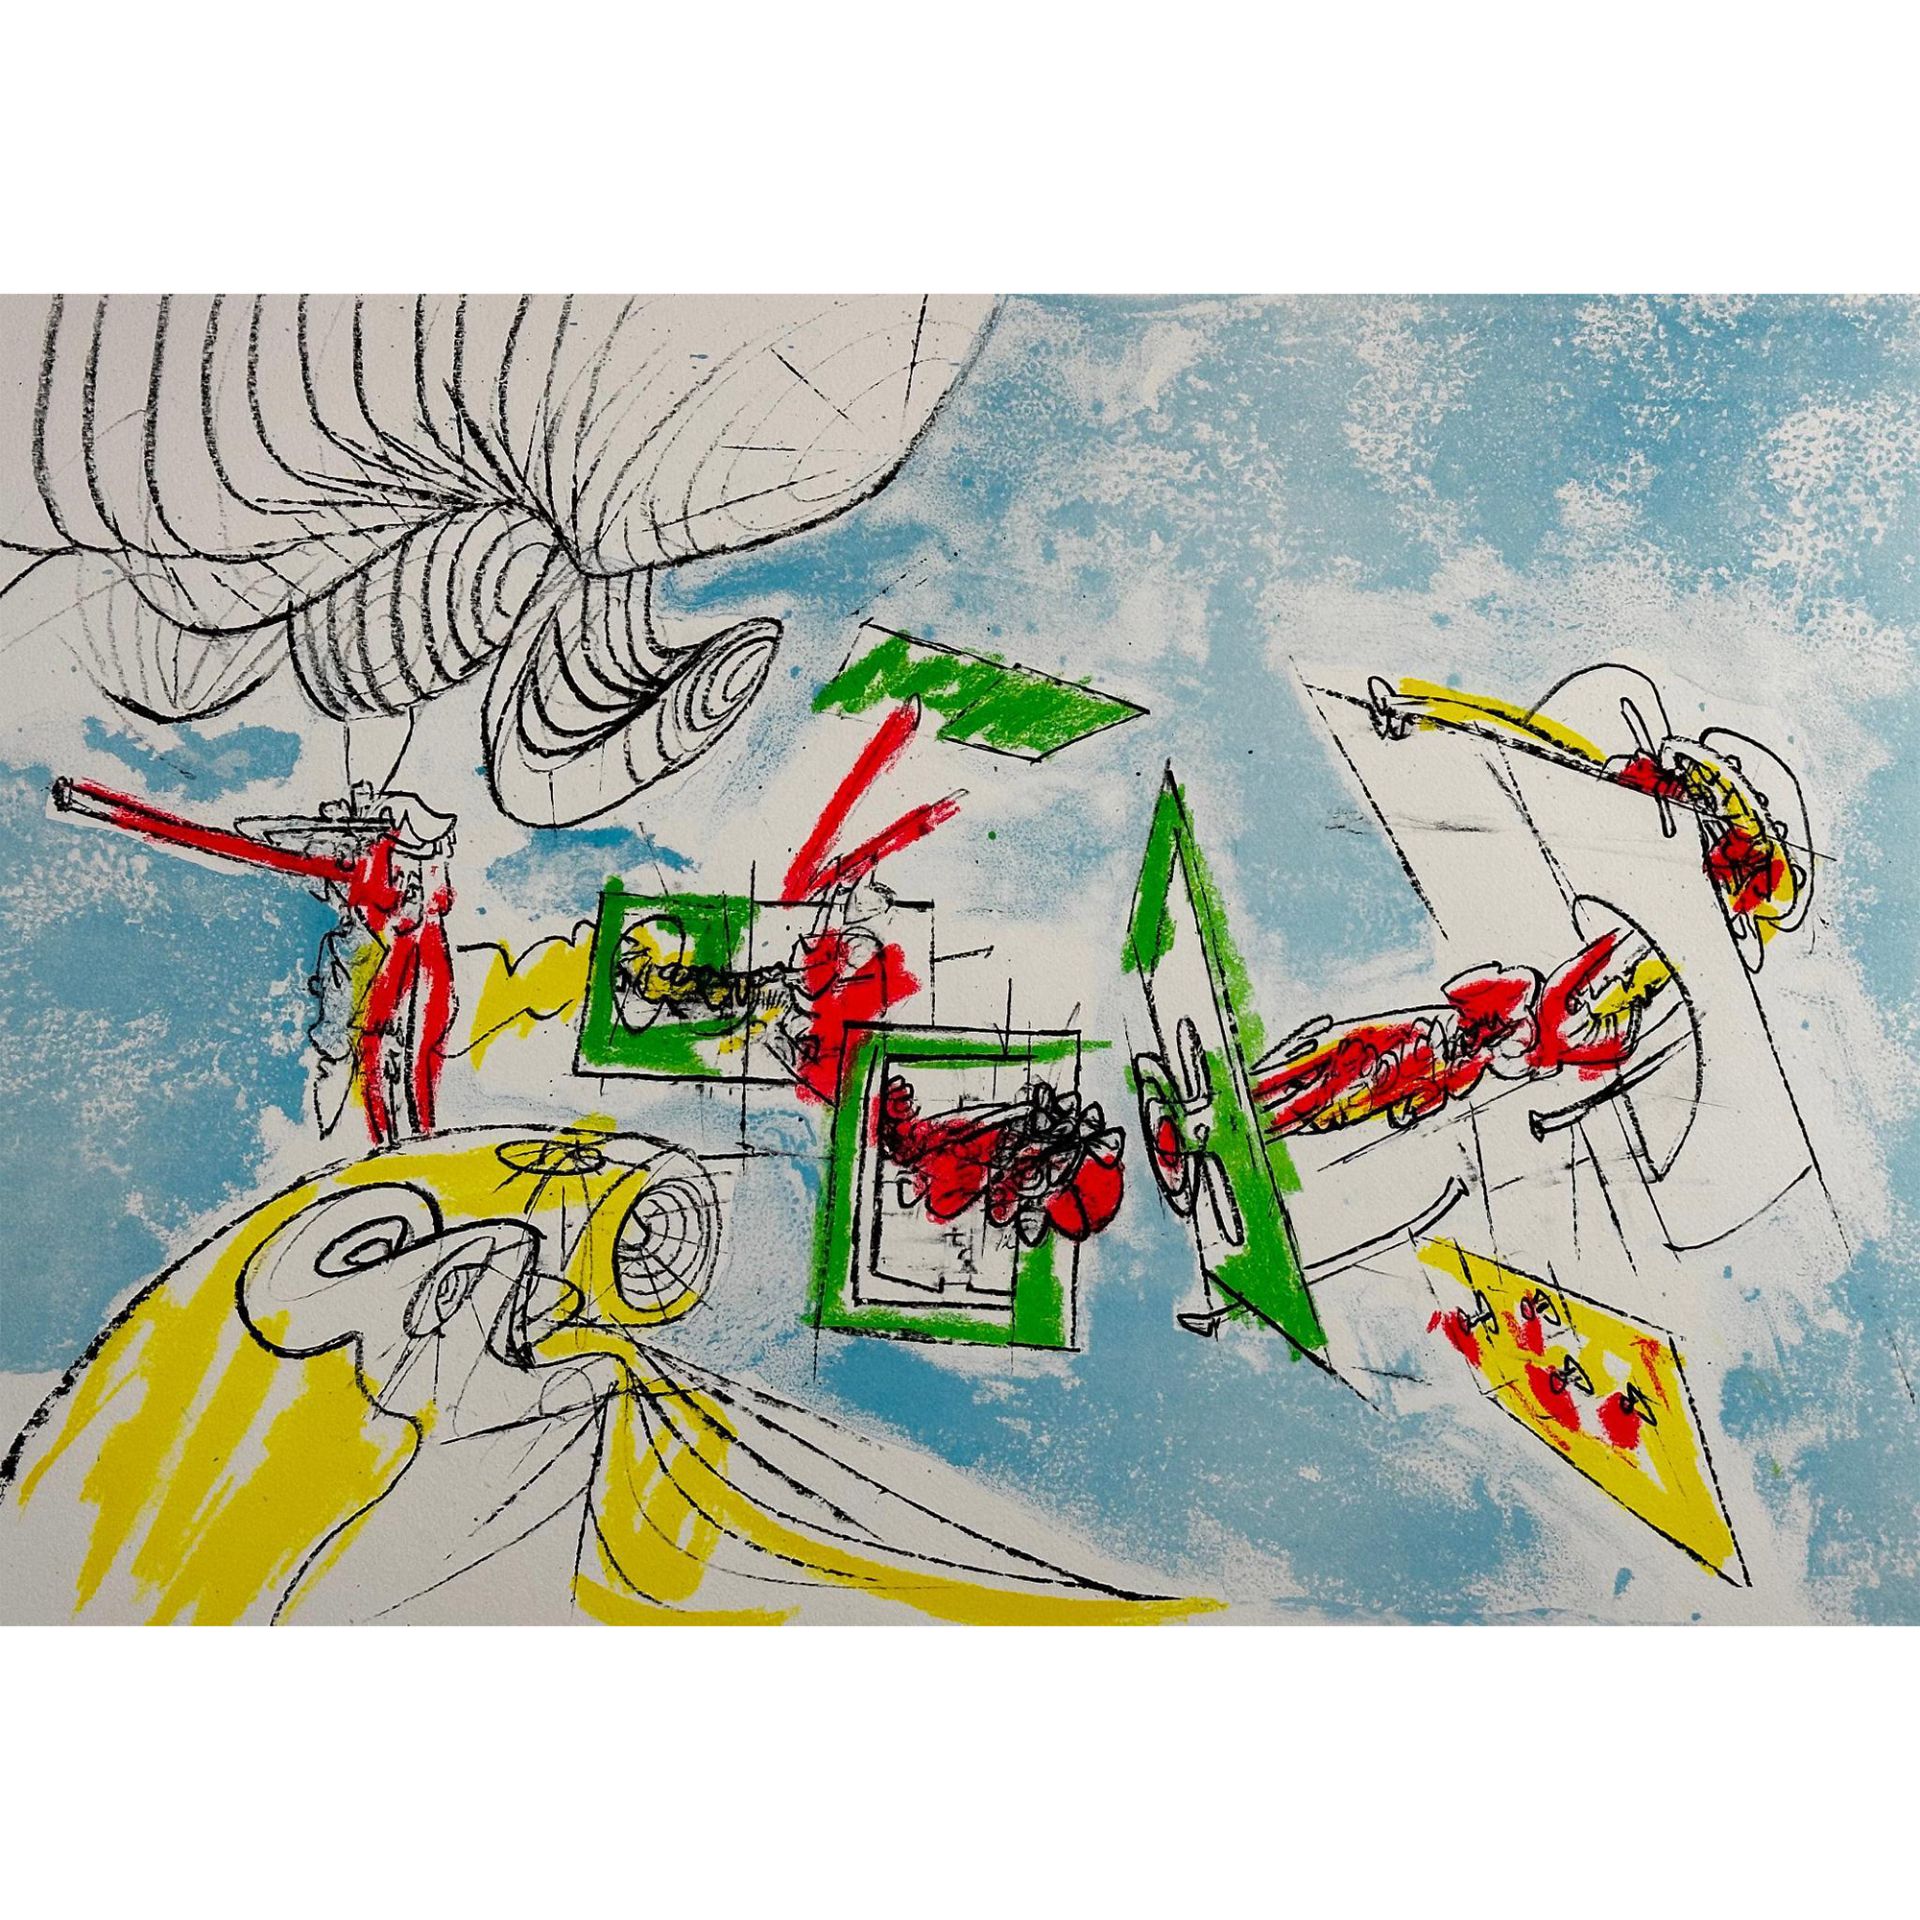 Roberto Matta (Chilean ) 1911-2002, Lithograph From Fog, Mog, Images 1, signed - Image 2 of 4